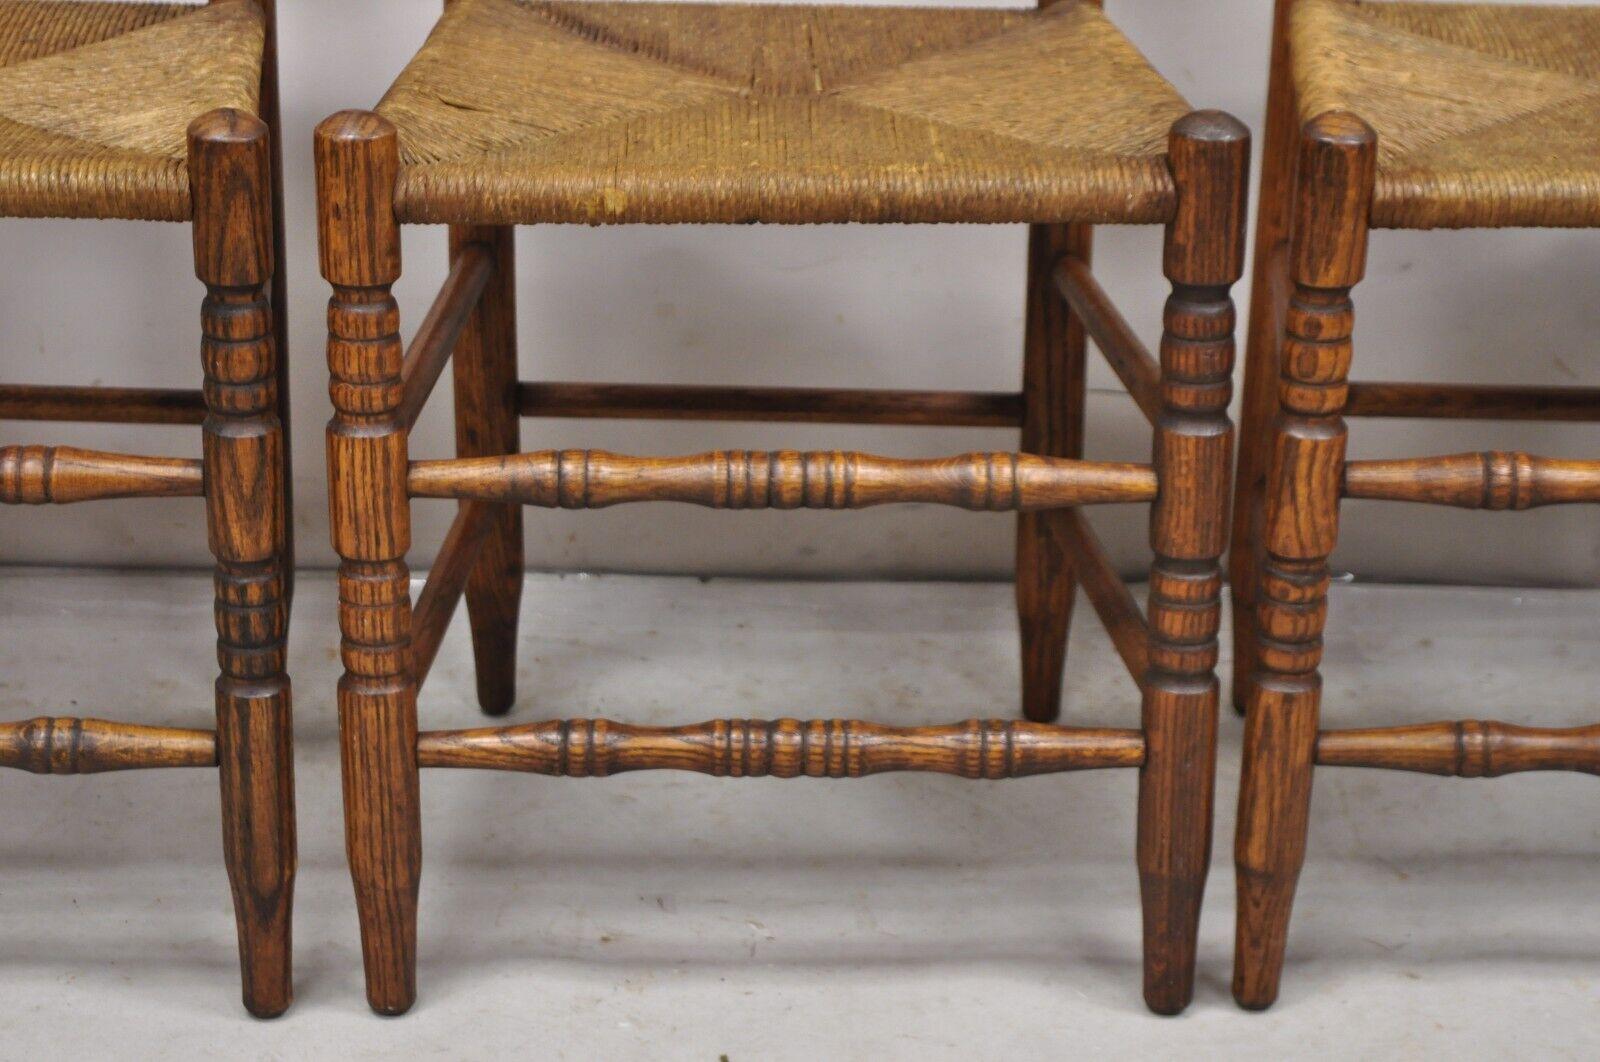 Cord Antique Ladderback Primitive Rustic Oak Wood Rush Seat Dining Chairs - Set of 4 For Sale